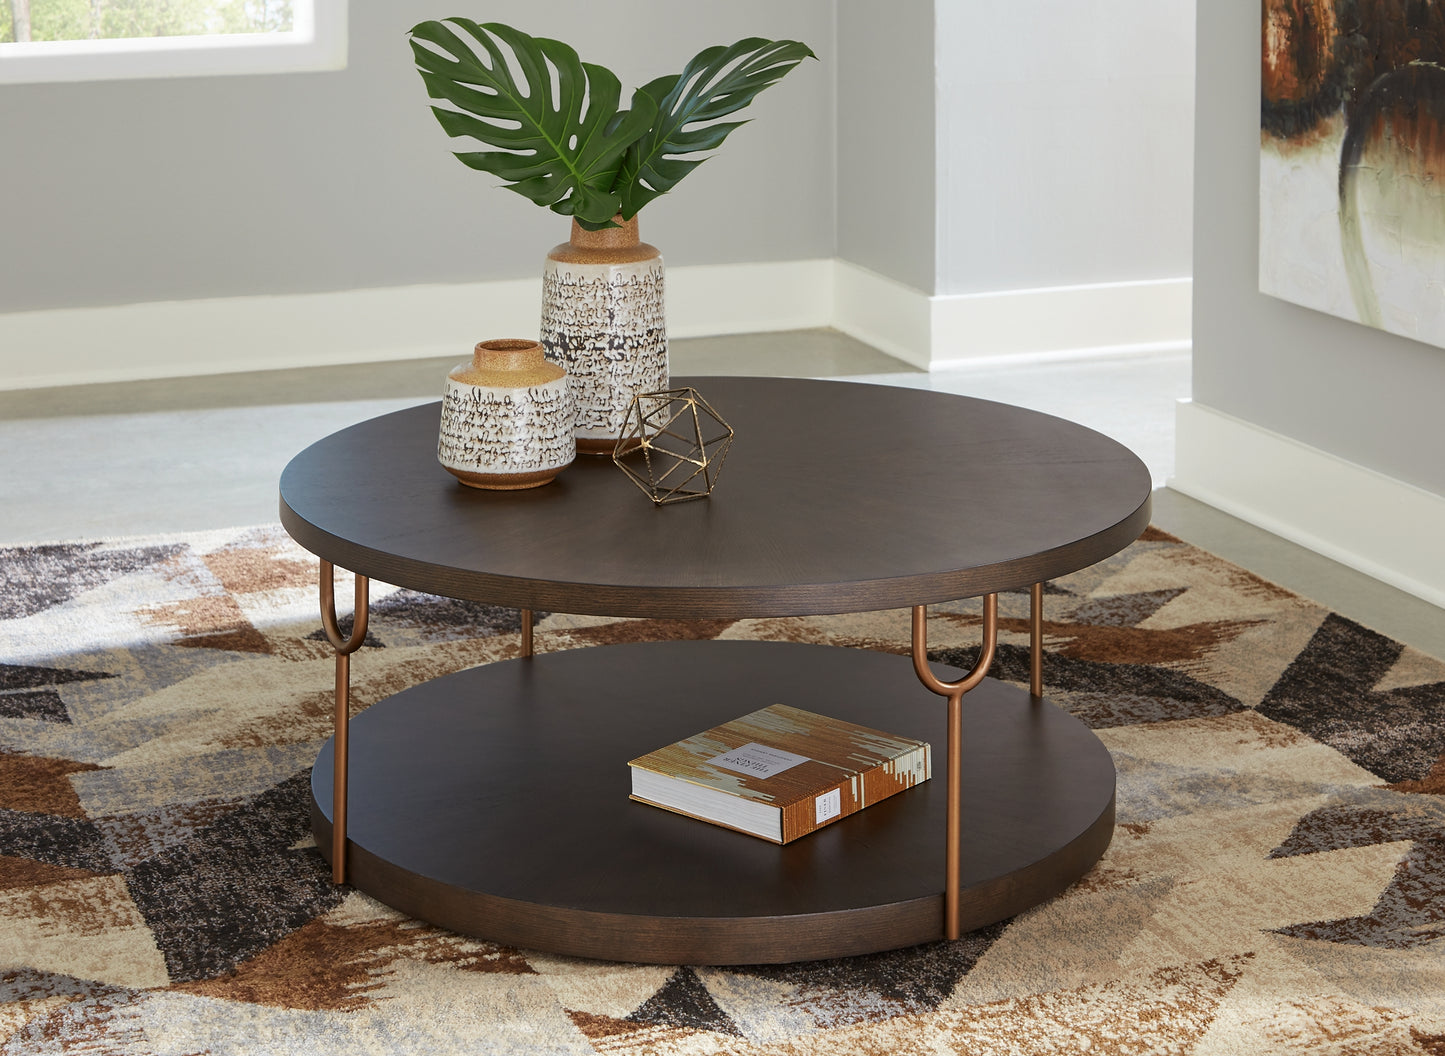 Brazburn Coffee Table with 1 End Table Wilson Furniture (OH)  in Bridgeport, Ohio. Serving Bridgeport, Yorkville, Bellaire, & Avondale